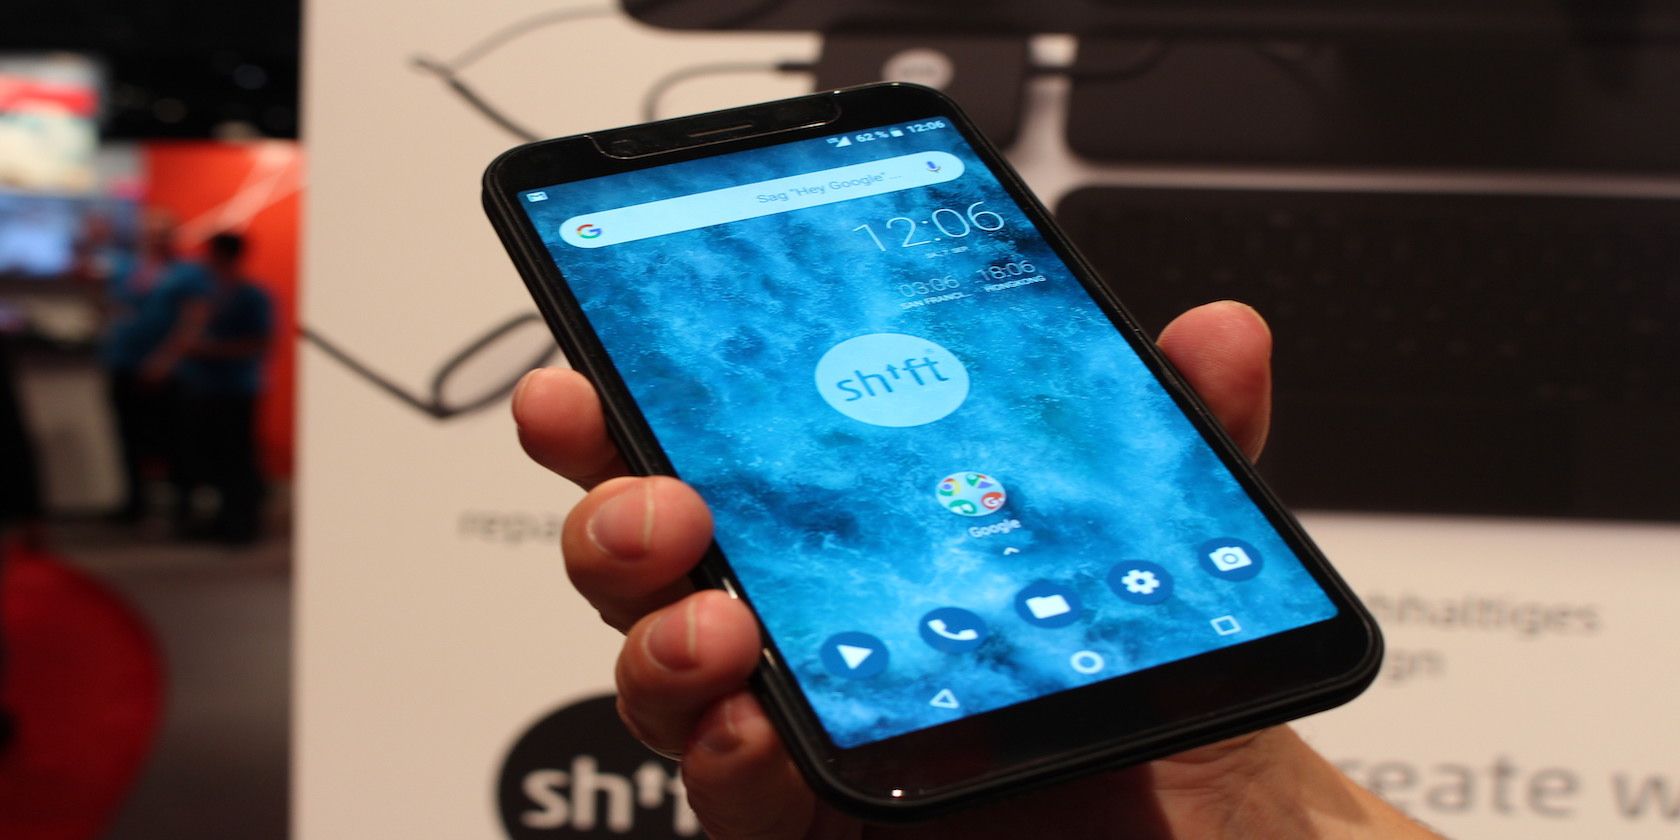 Shiftphone: Sustainable, Ethical & Eco-Friendly Smartphones